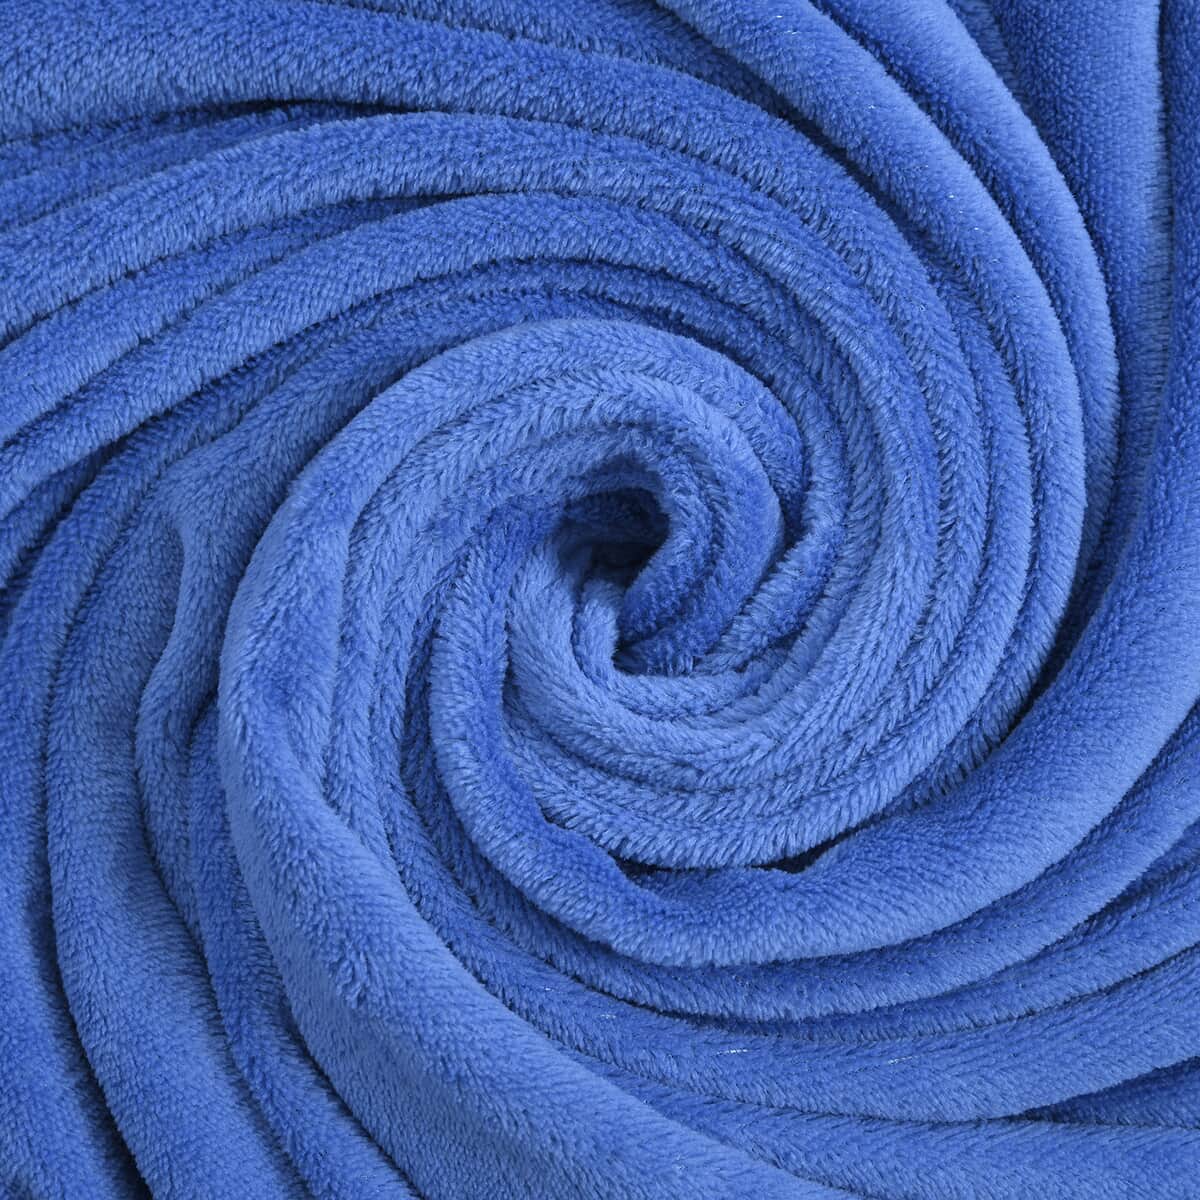 Homesmart Federal Blue Solid Coral Fleece Warmth and Soft Blanket image number 3